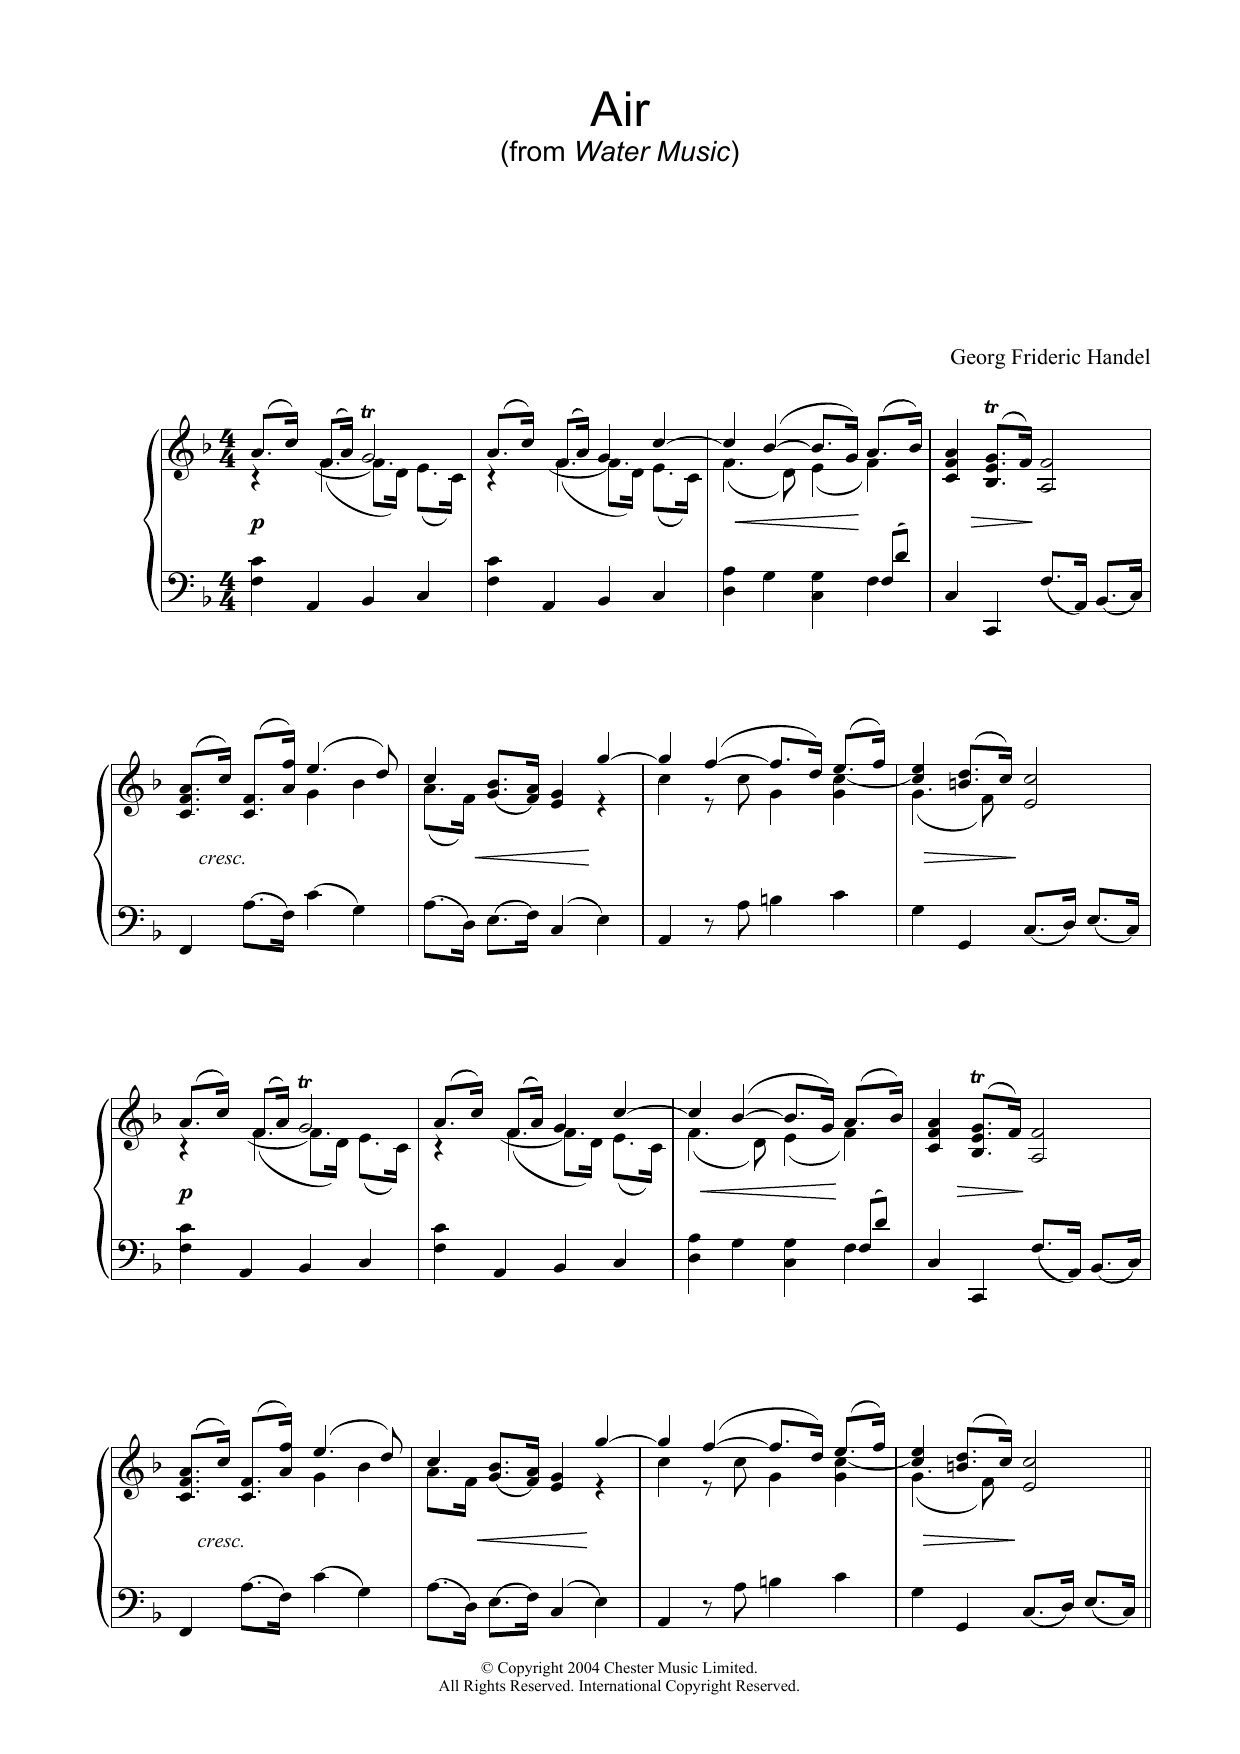 George Frideric Handel Air (from The Water Music Suite) sheet music notes and chords. Download Printable PDF.